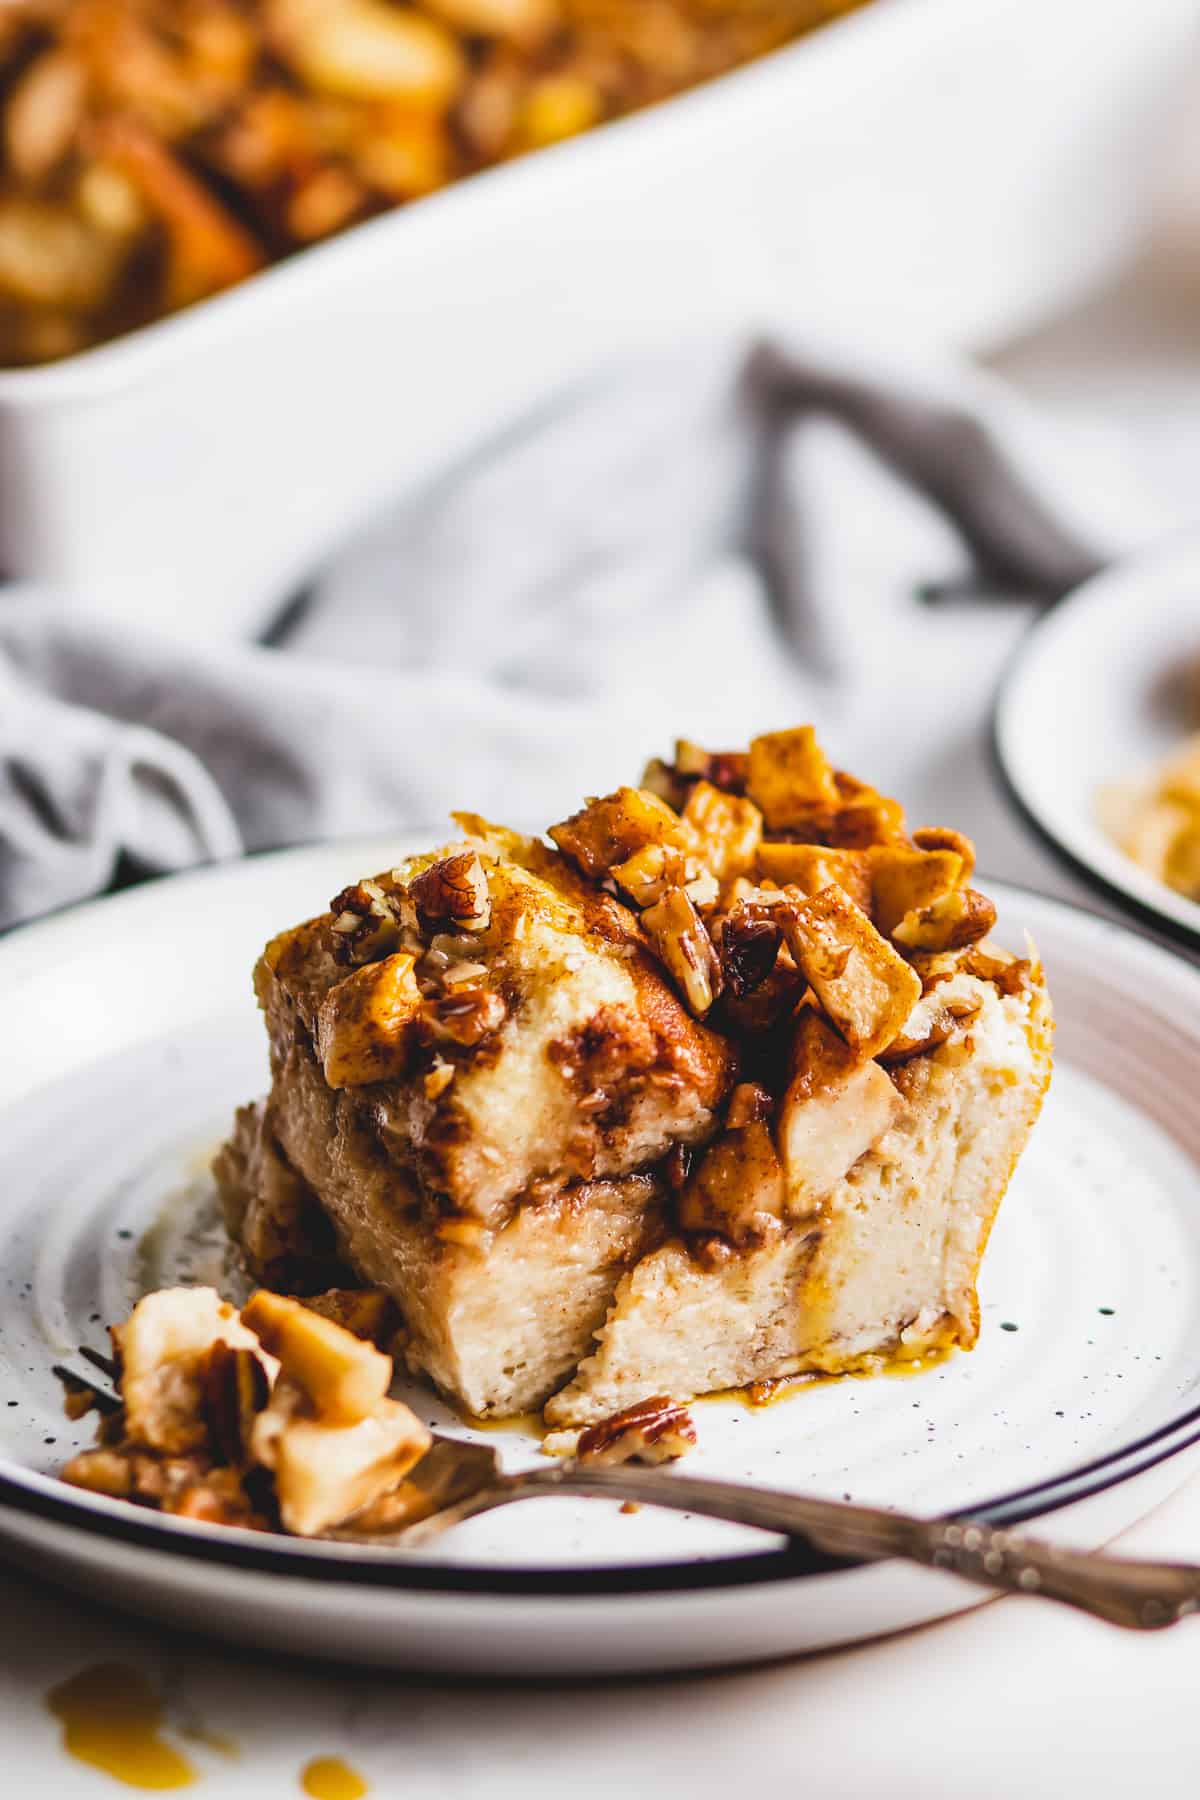 Slice of apple cinnamon French toast bake on a plate.